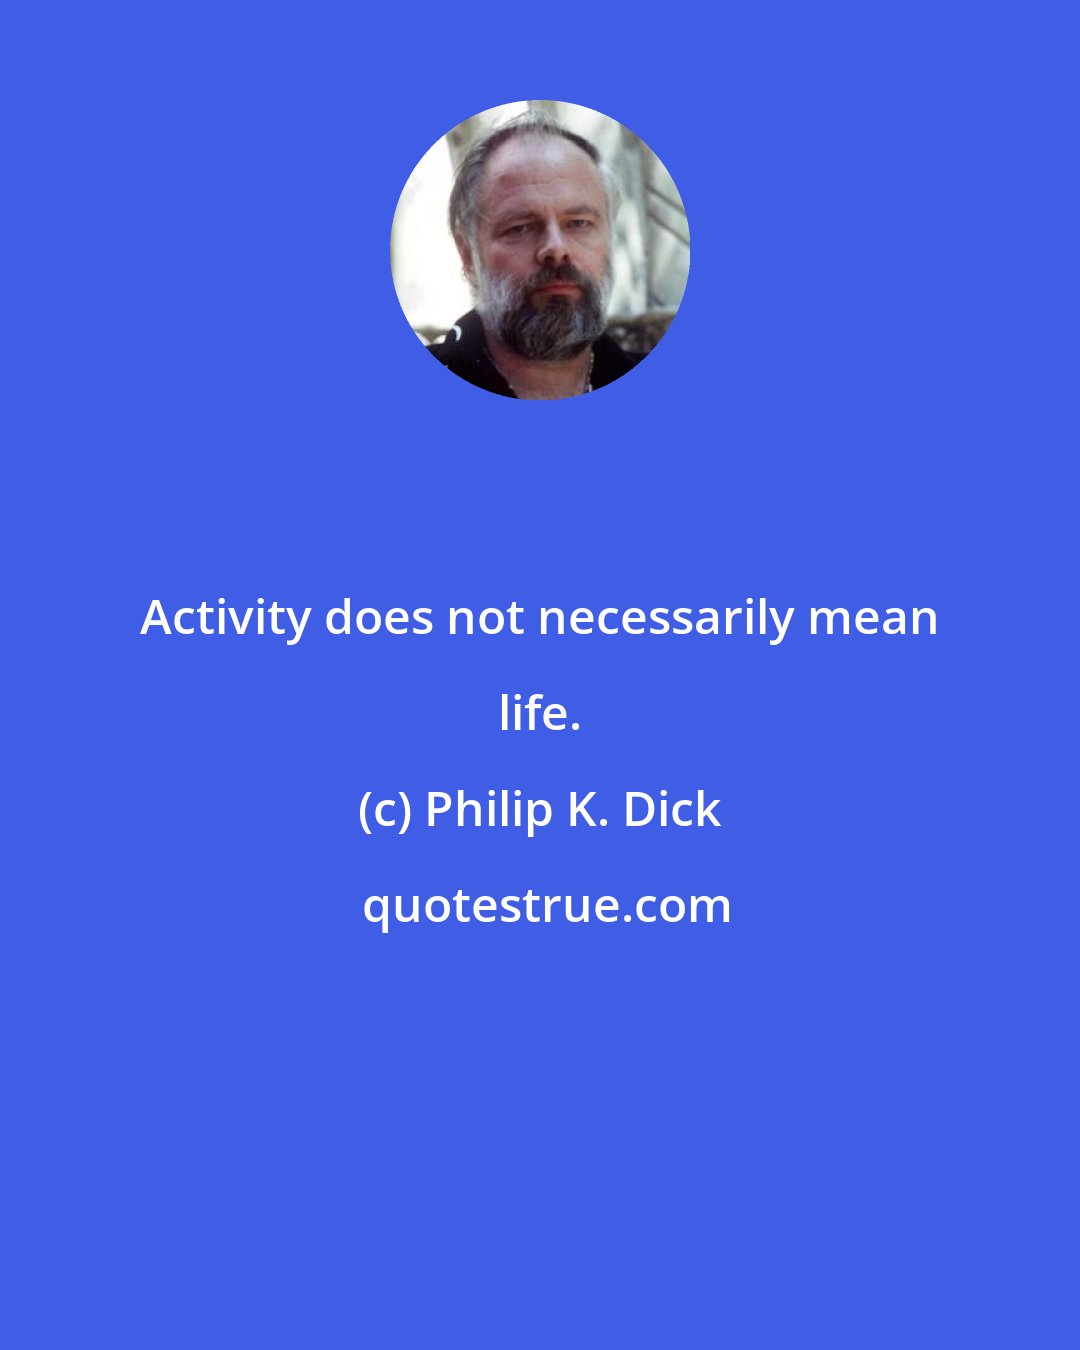 Philip K. Dick: Activity does not necessarily mean life.